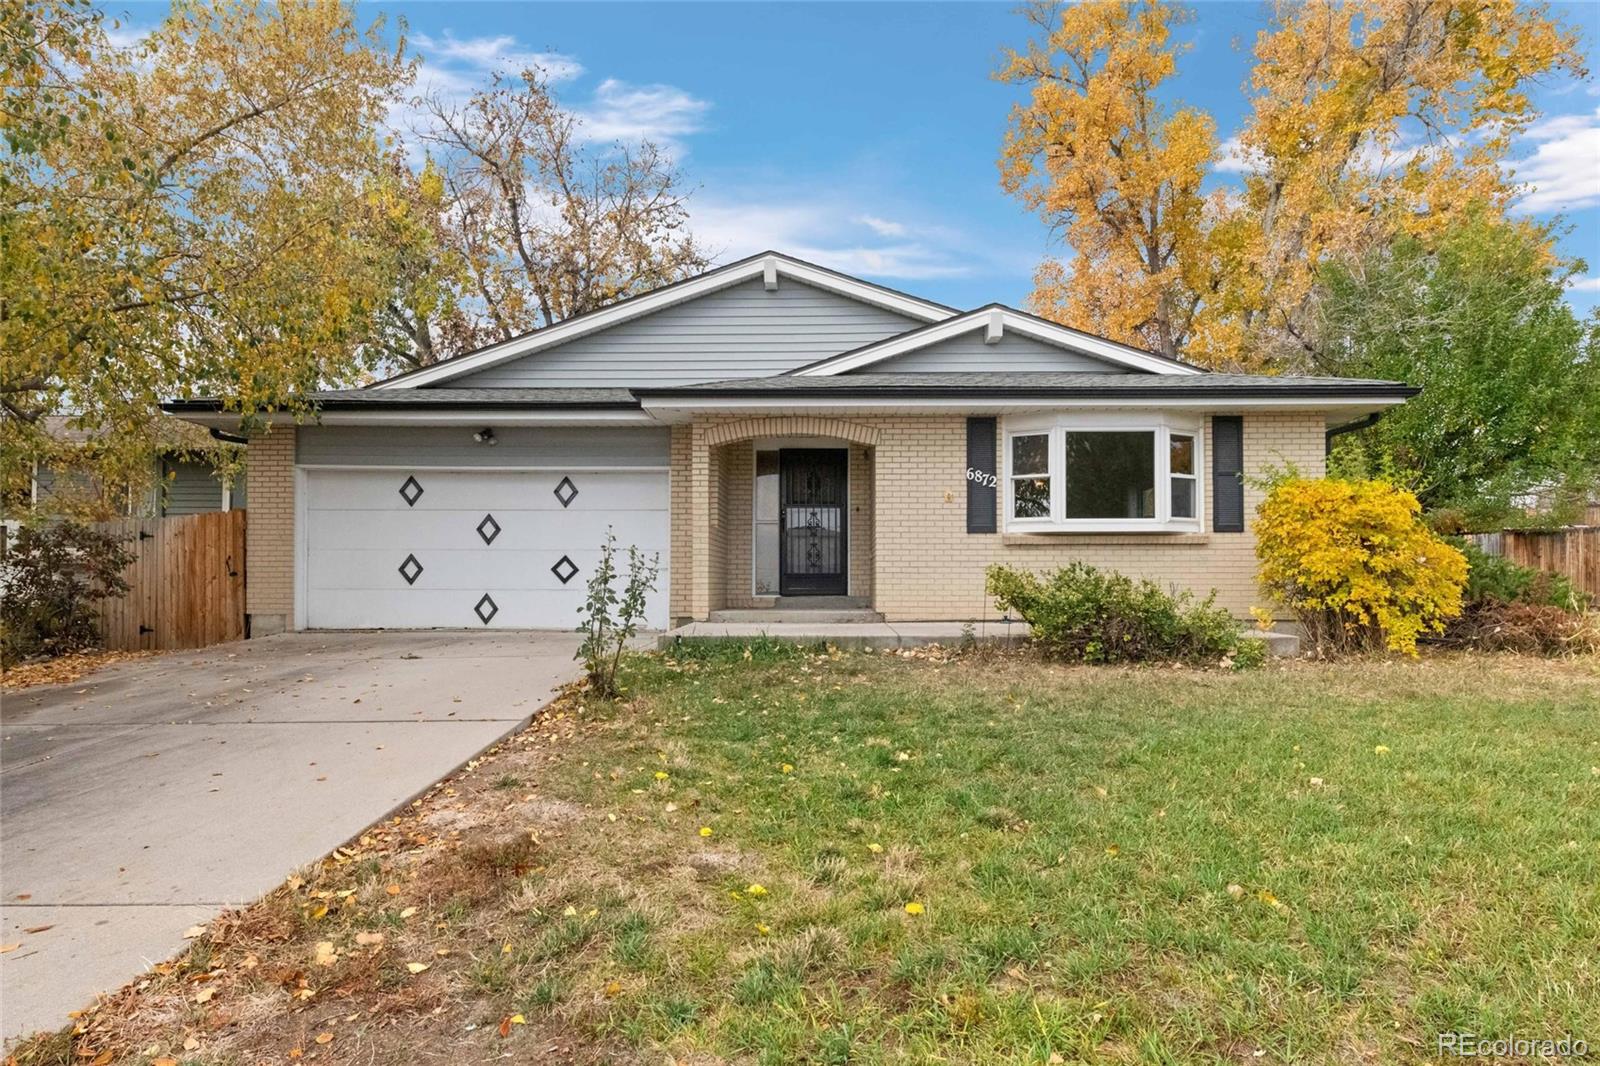 6872 w 69th avenue, arvada sold home. Closed on 2023-12-06 for $515,000.